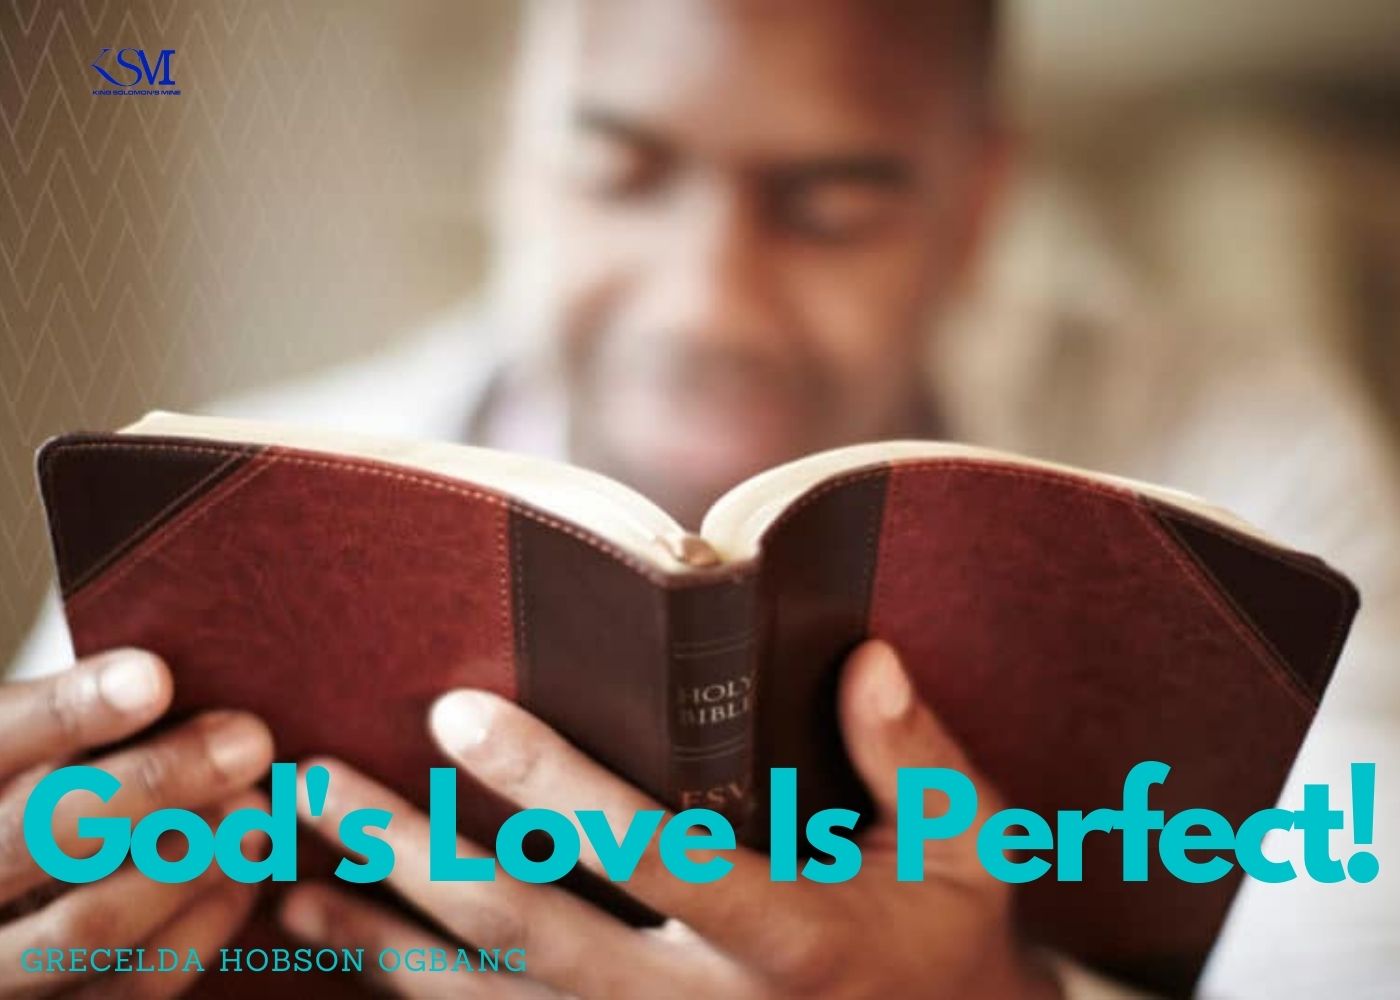 God's love is perfect!